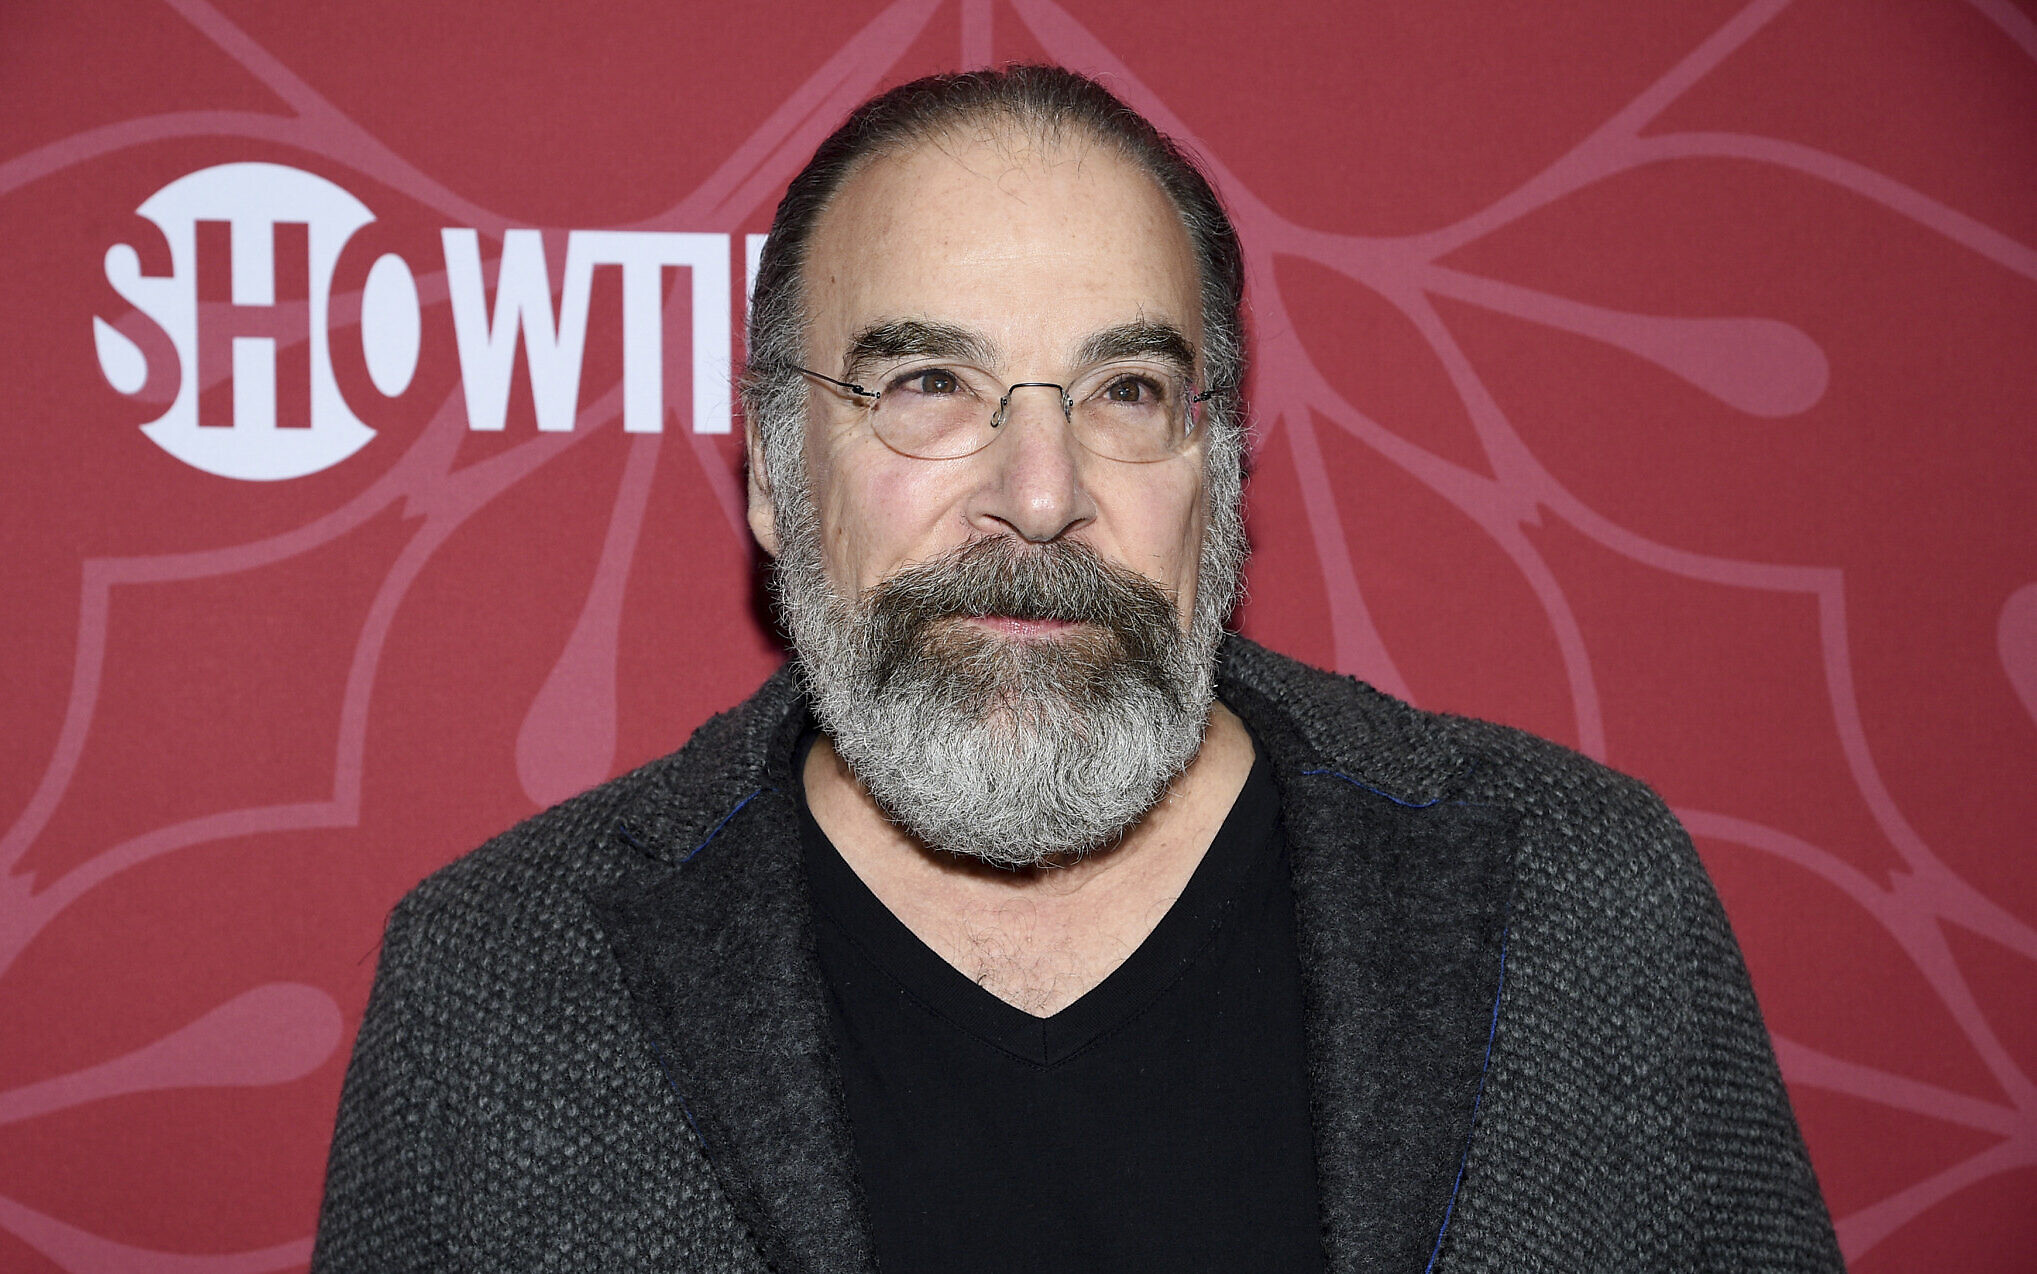 Meet Mandy Patinkin Children: Who Are Gideon Grody-Patinkin And Isaac Patinkin? - Facts.net